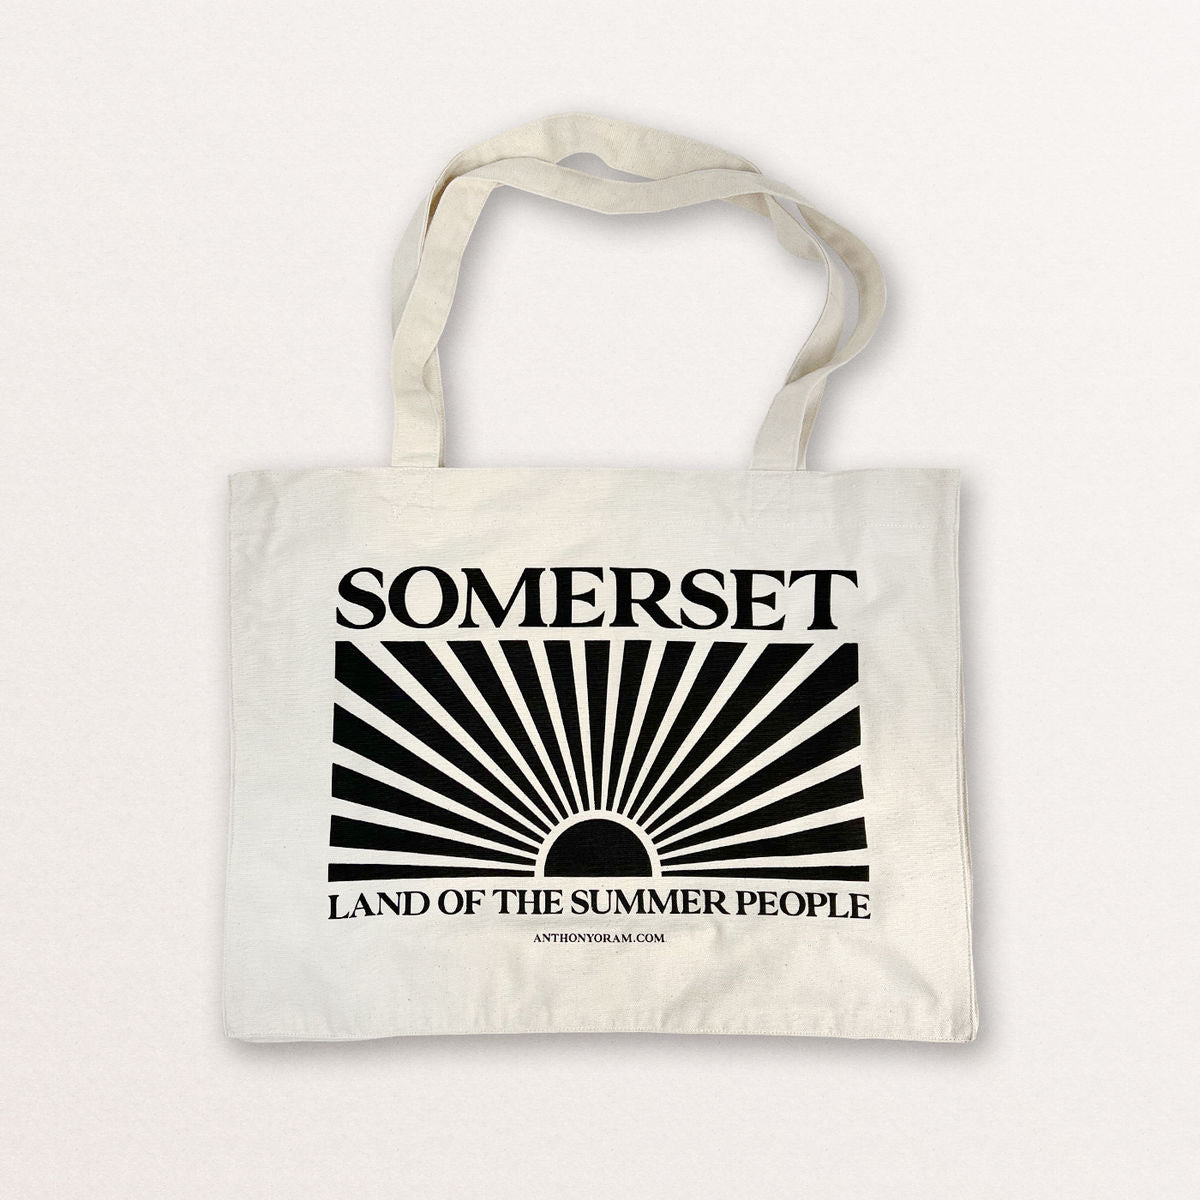 Somerset - Land of the Summer People - Recycled Tote Bag